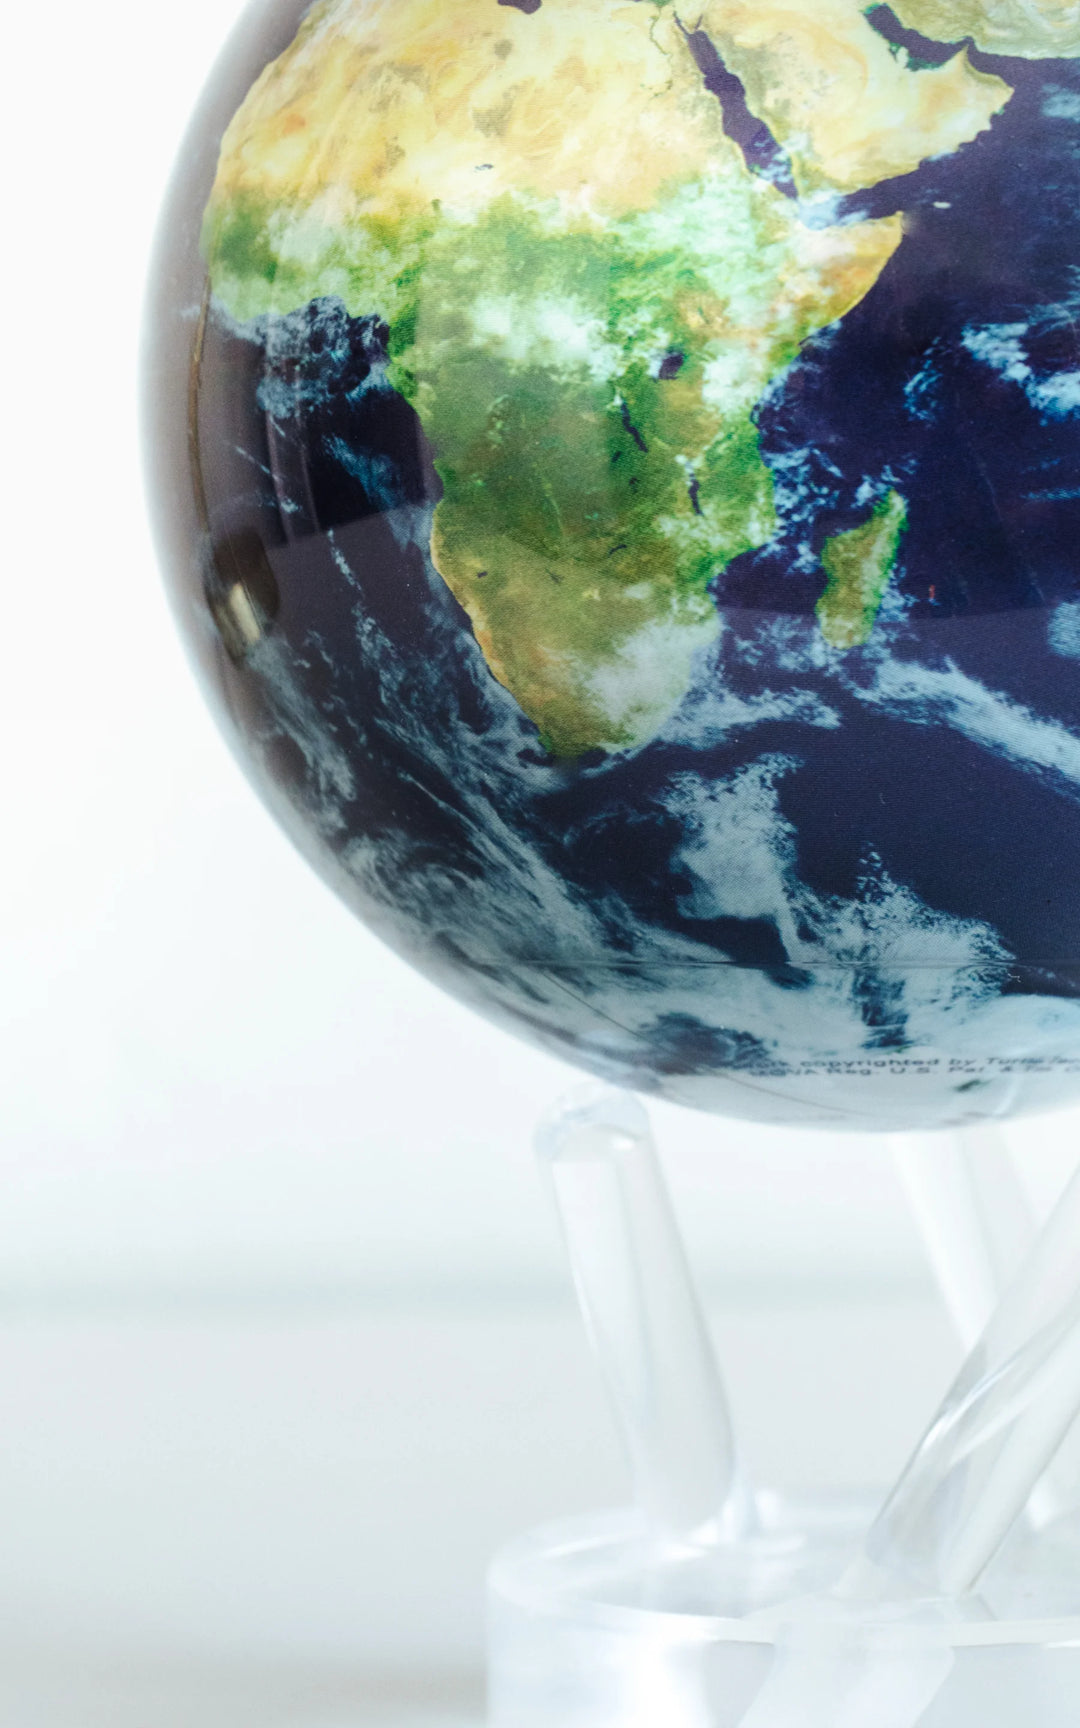 Earth with Clouds Globe